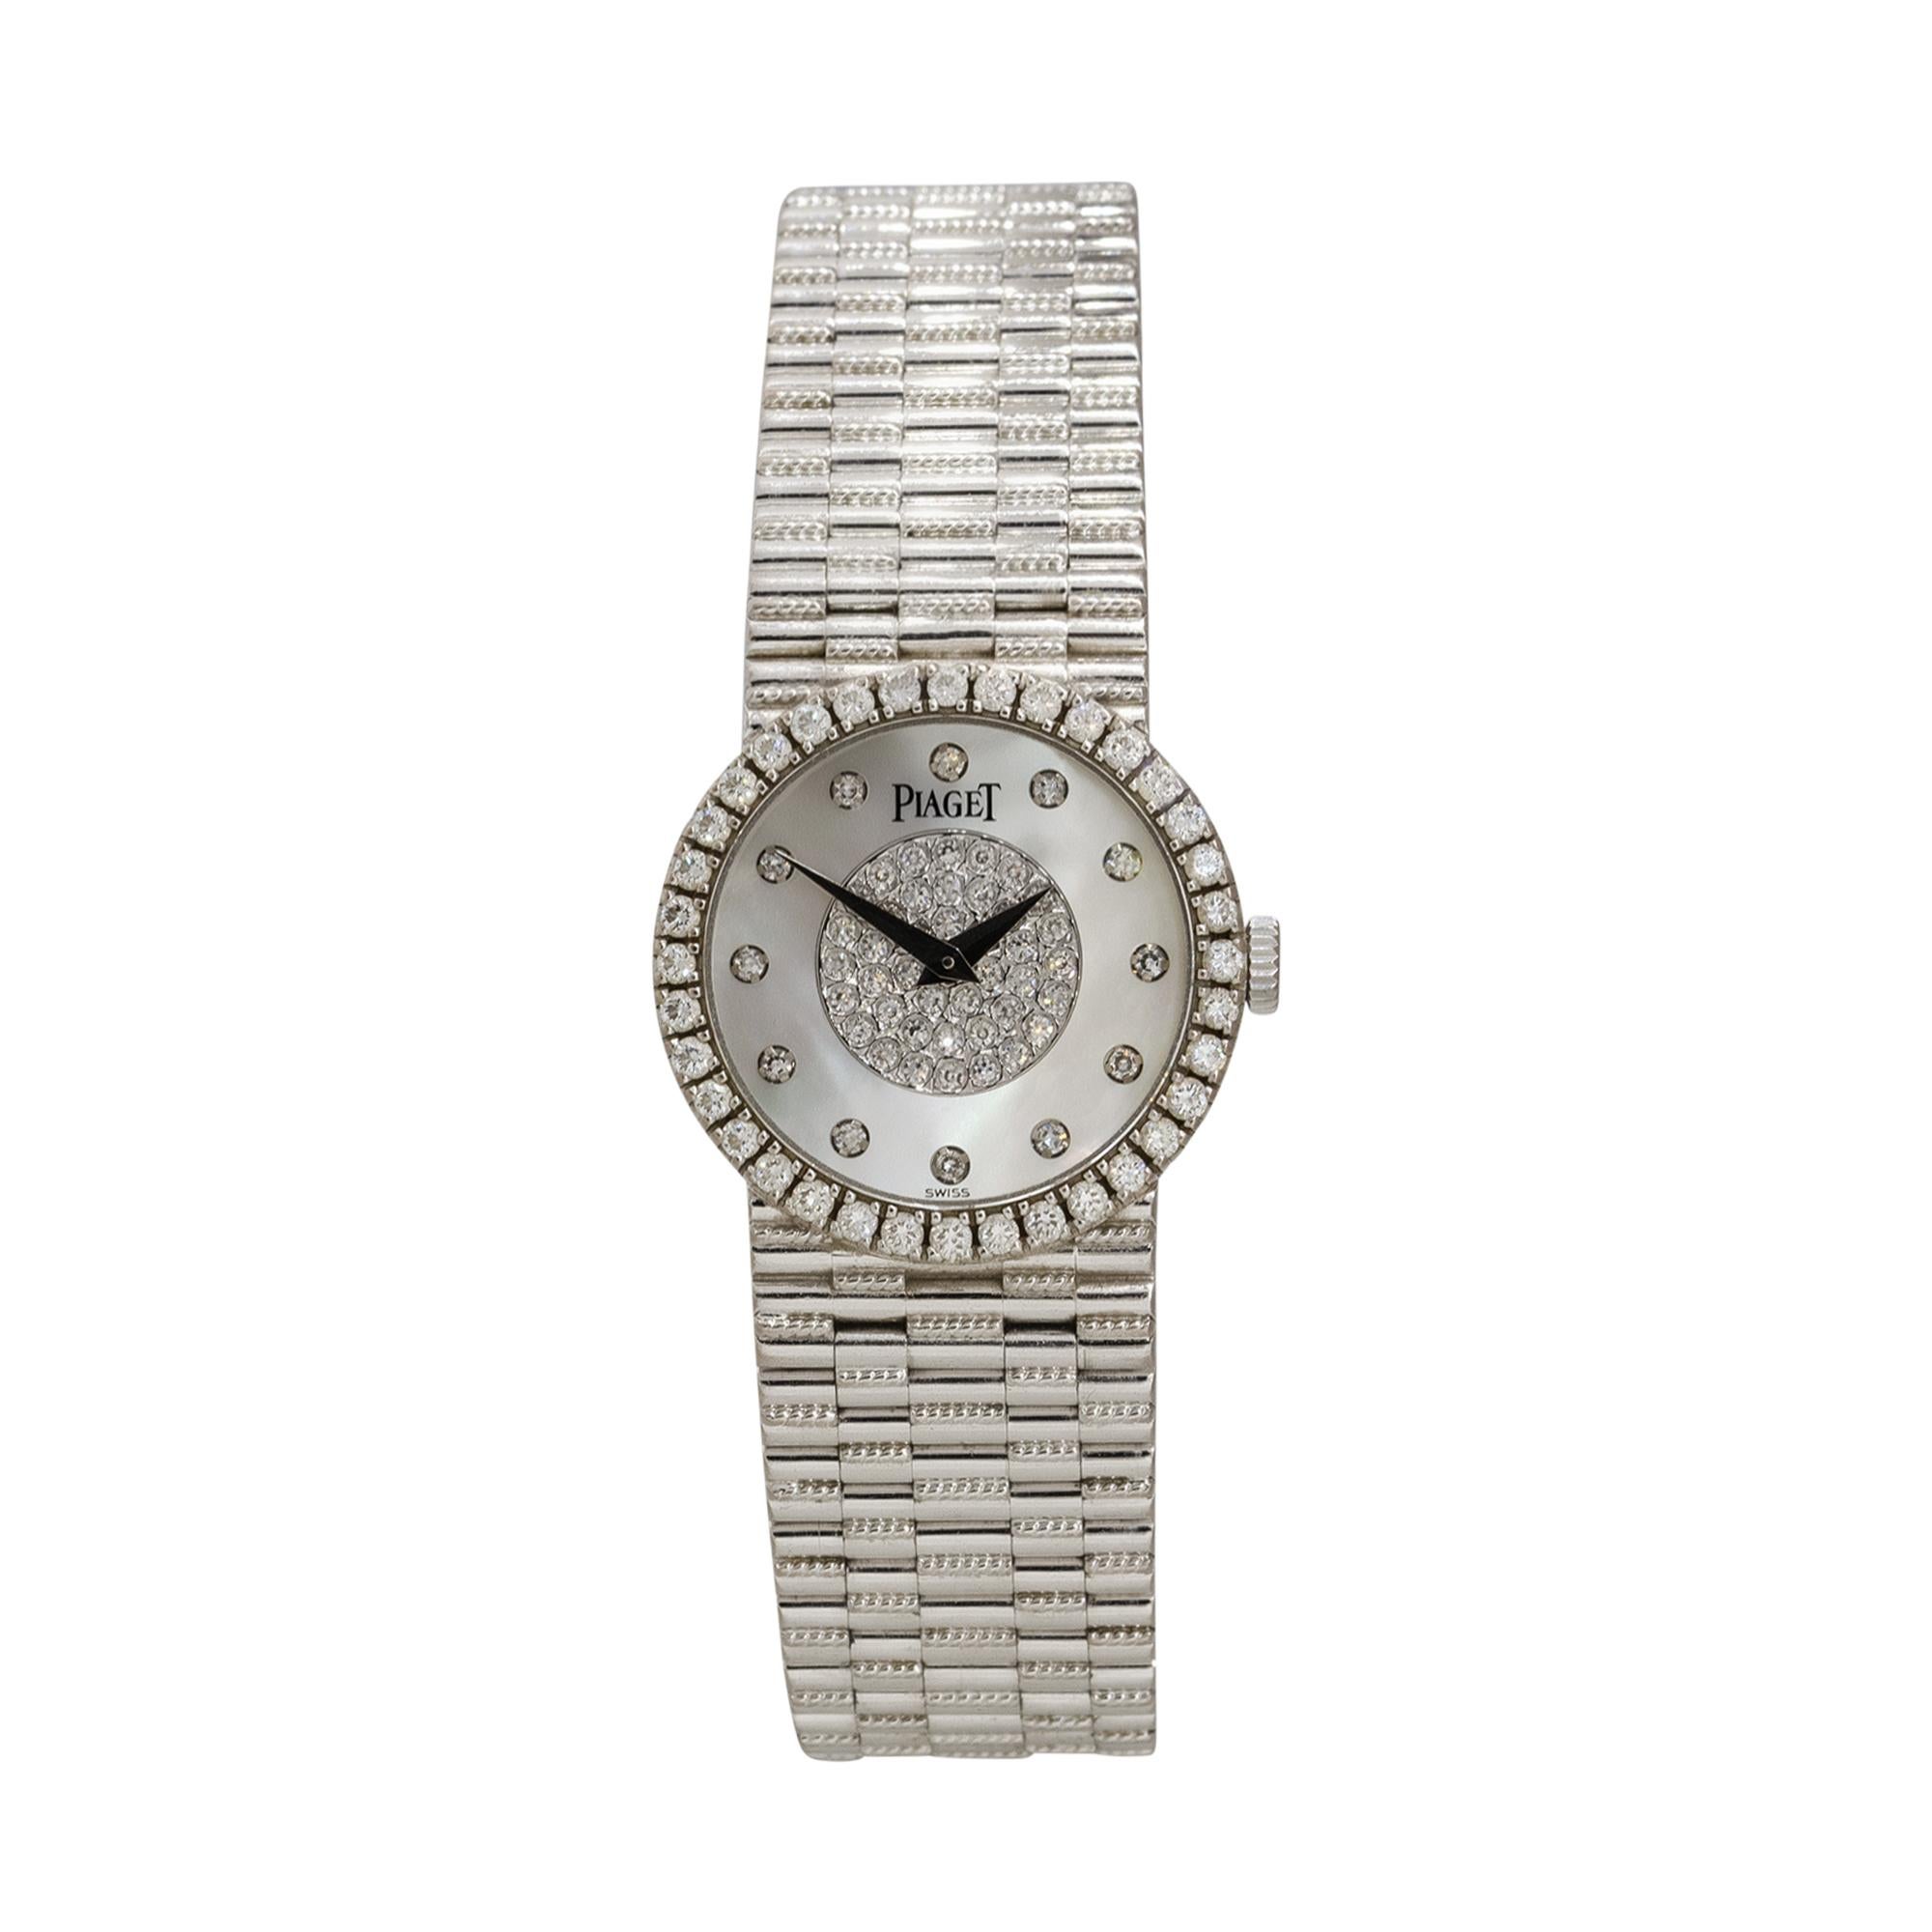 Brand: Piaget
Case Material: 18k White Gold
Case Diameter: 24.5mm
Crystal: Sapphire Crystal
Bezel: 18k White Gold bezel with Diamonds
Dial: Mother of Pearl dial with silver hands, Diamond hour markers and Diamond cluster at the center
Bracelet: 18k